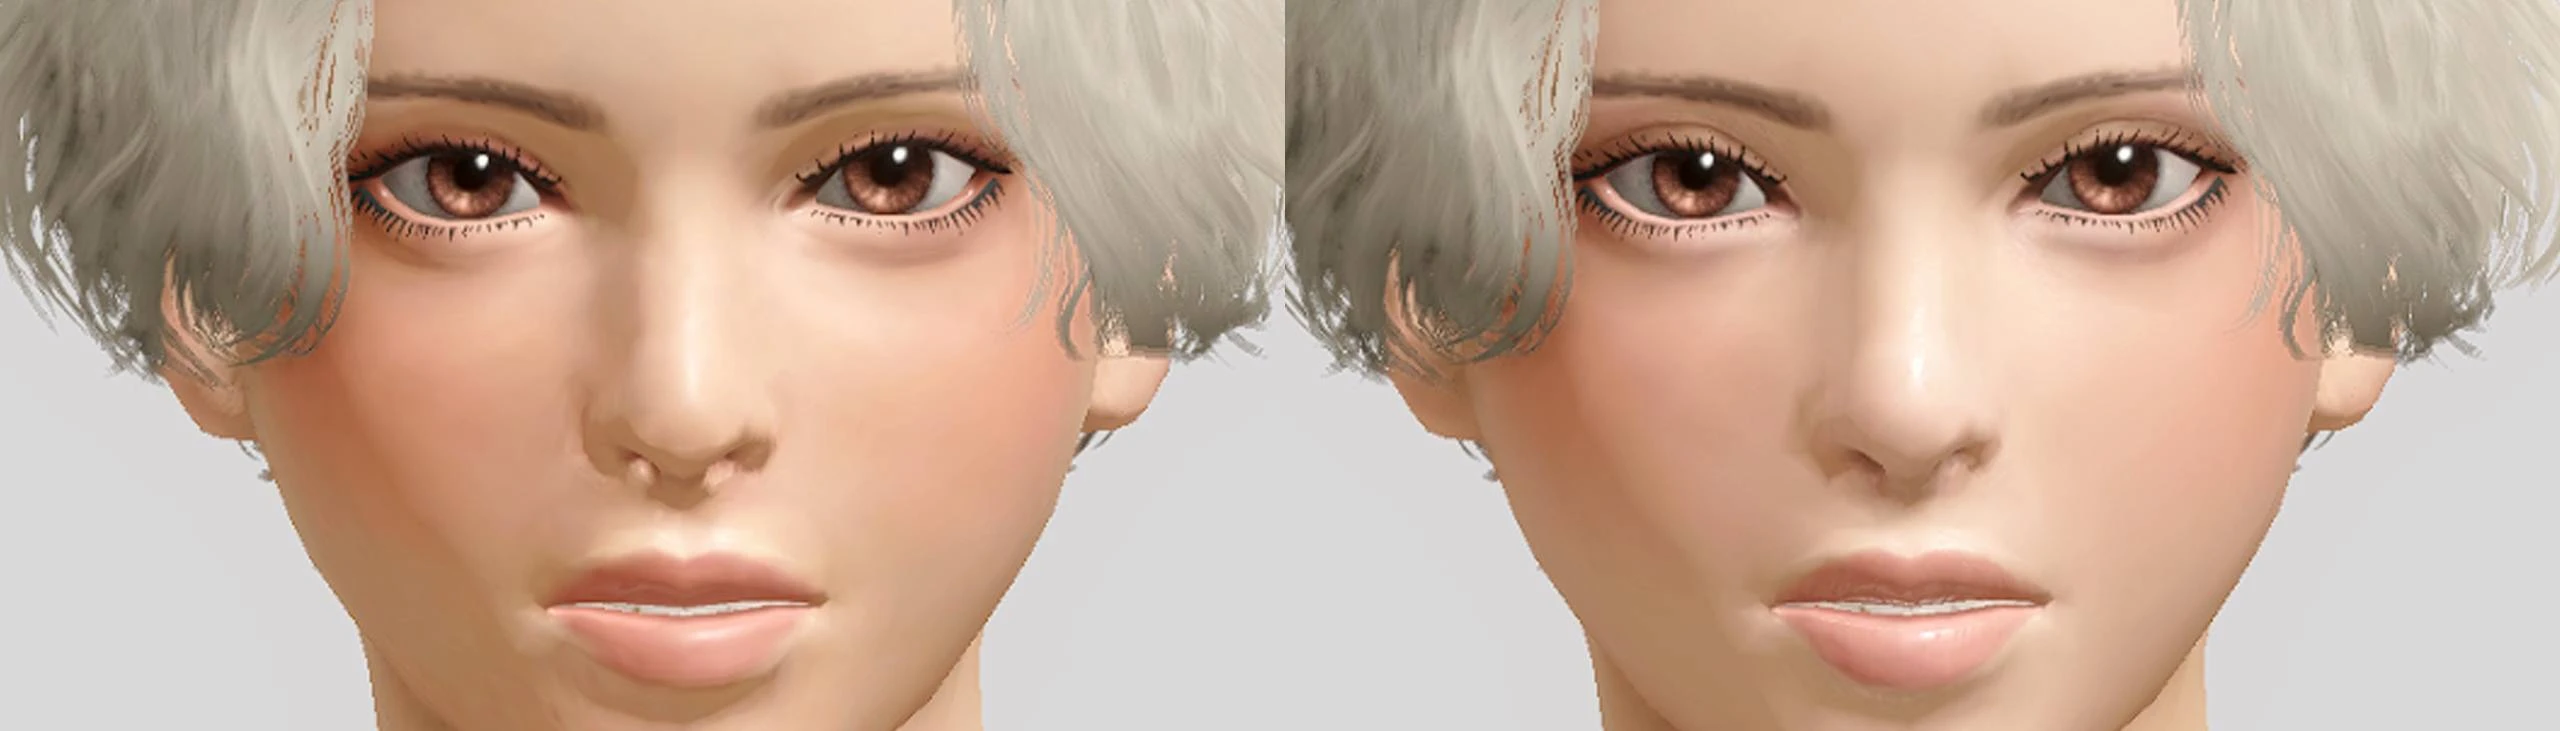 face texture reference